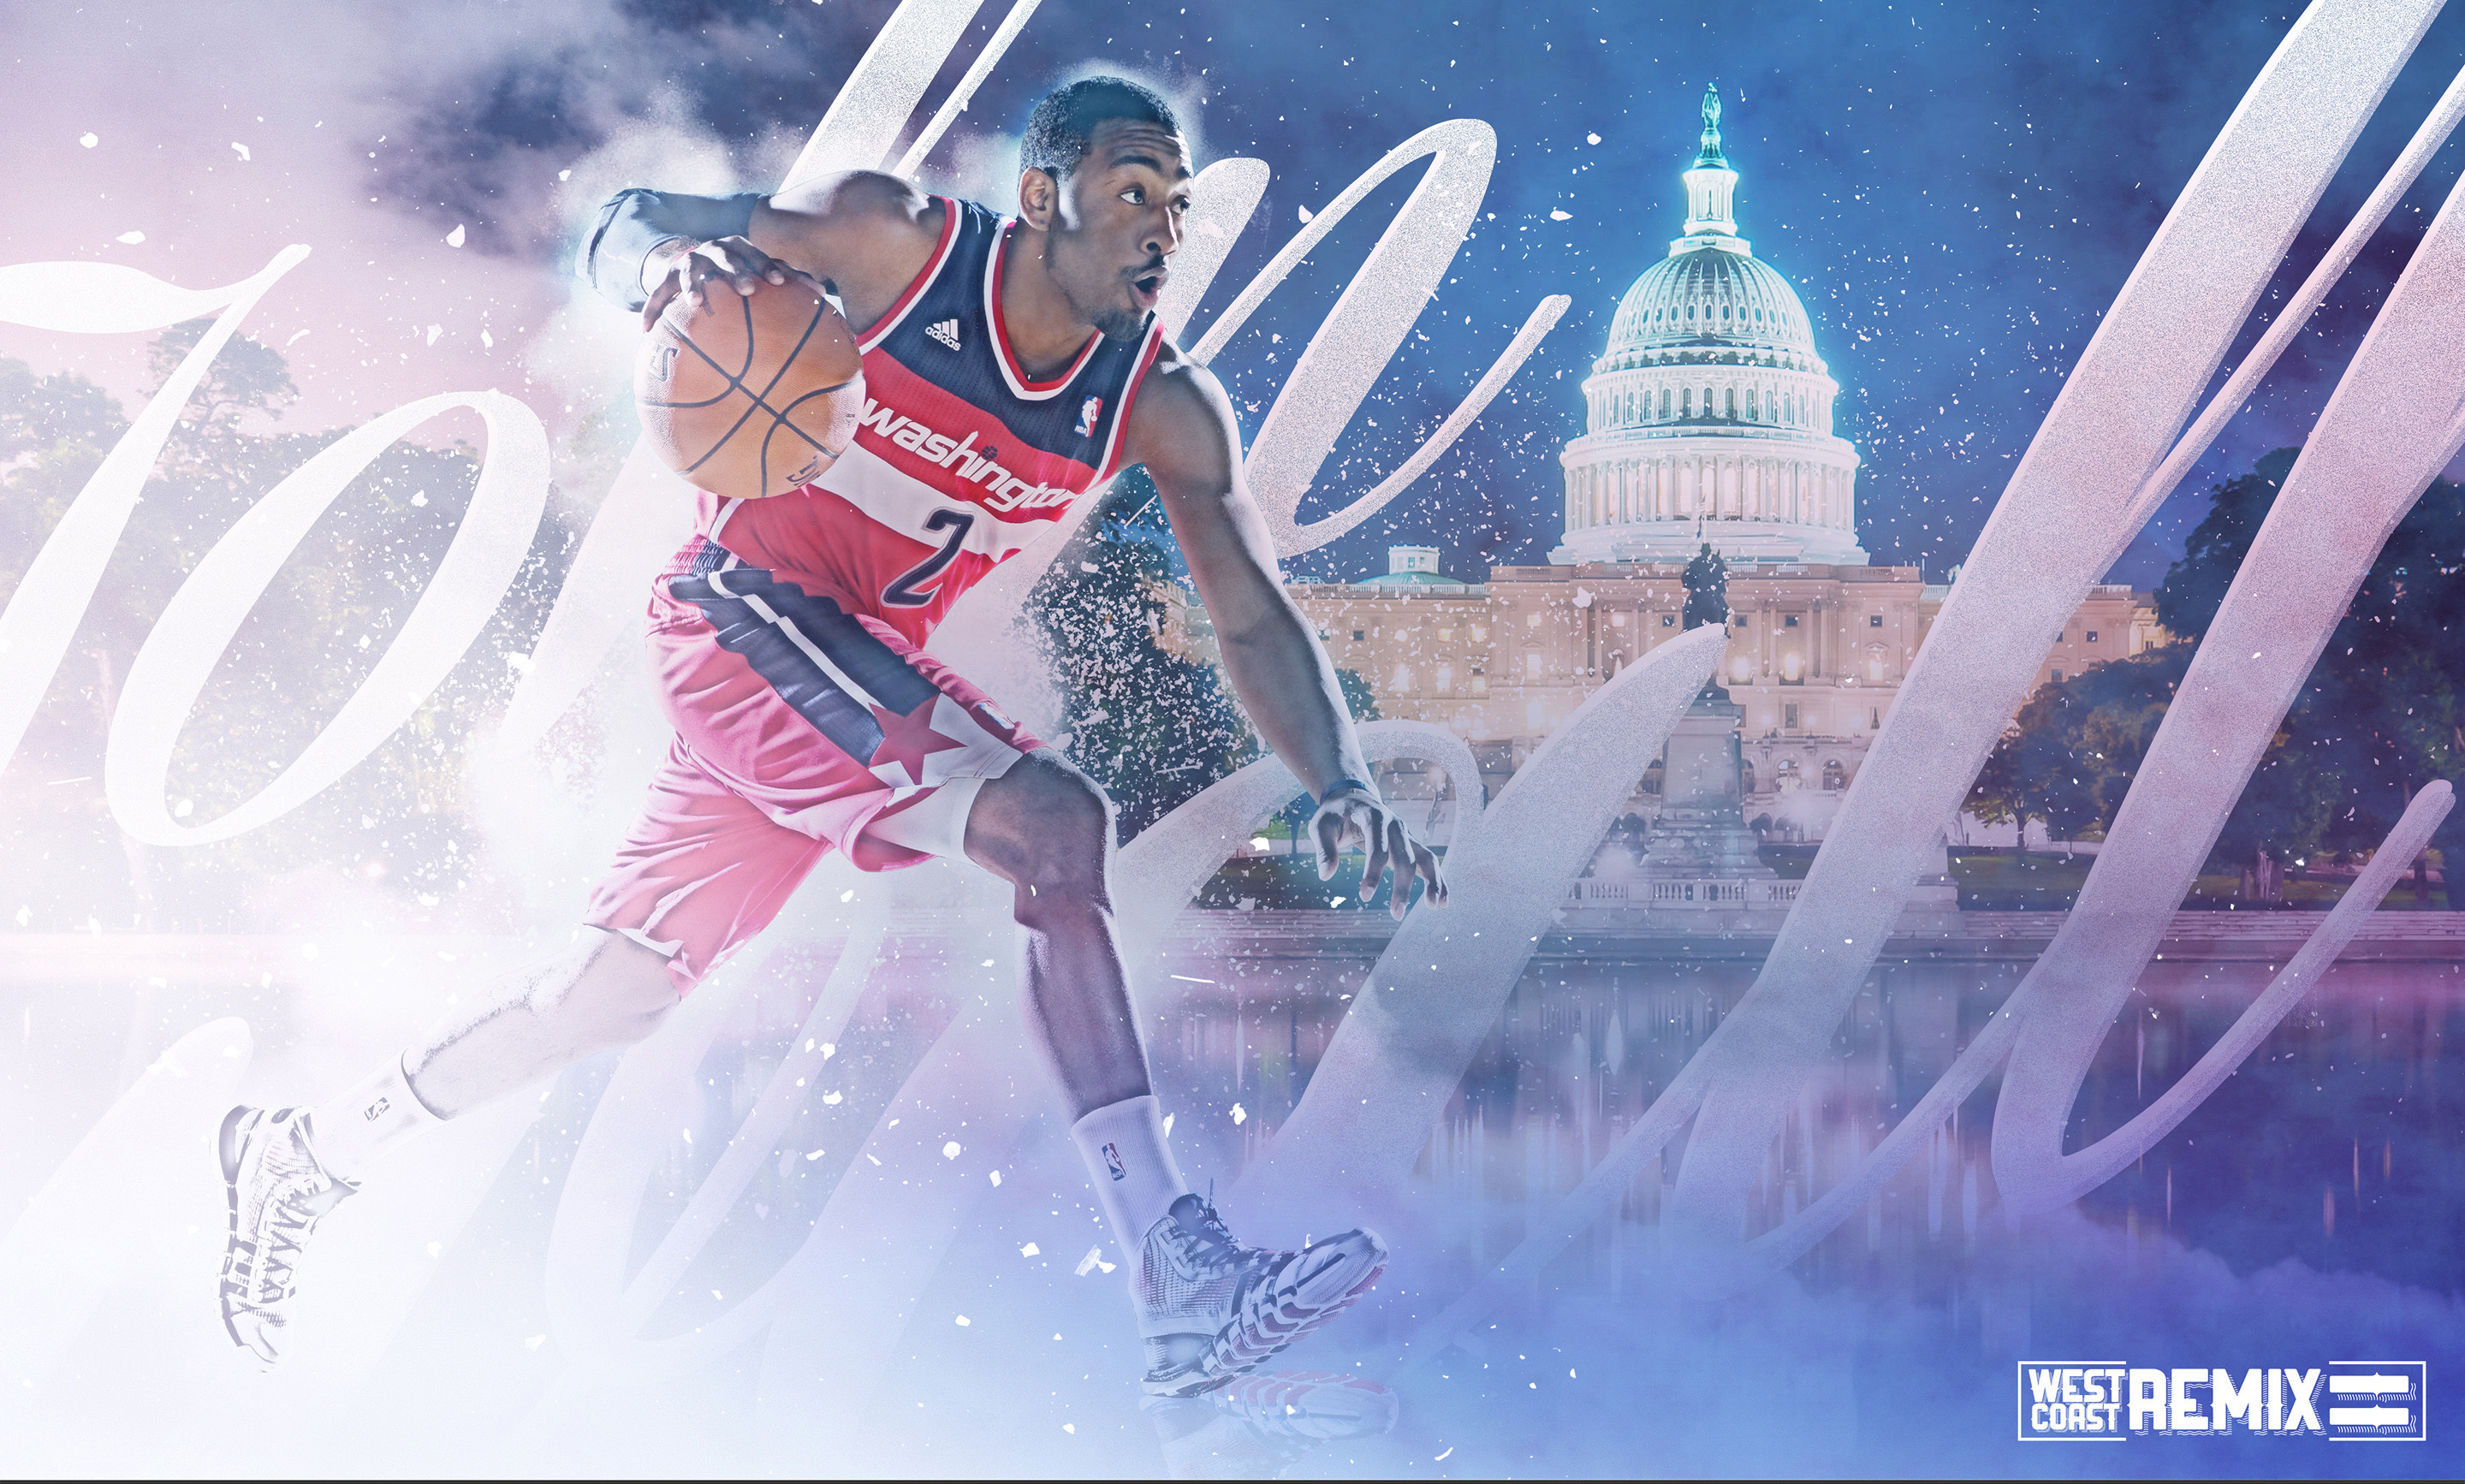 John wall backgrounds desktop hd free amazing cool background images mac windows 10 tablet 2880×1734